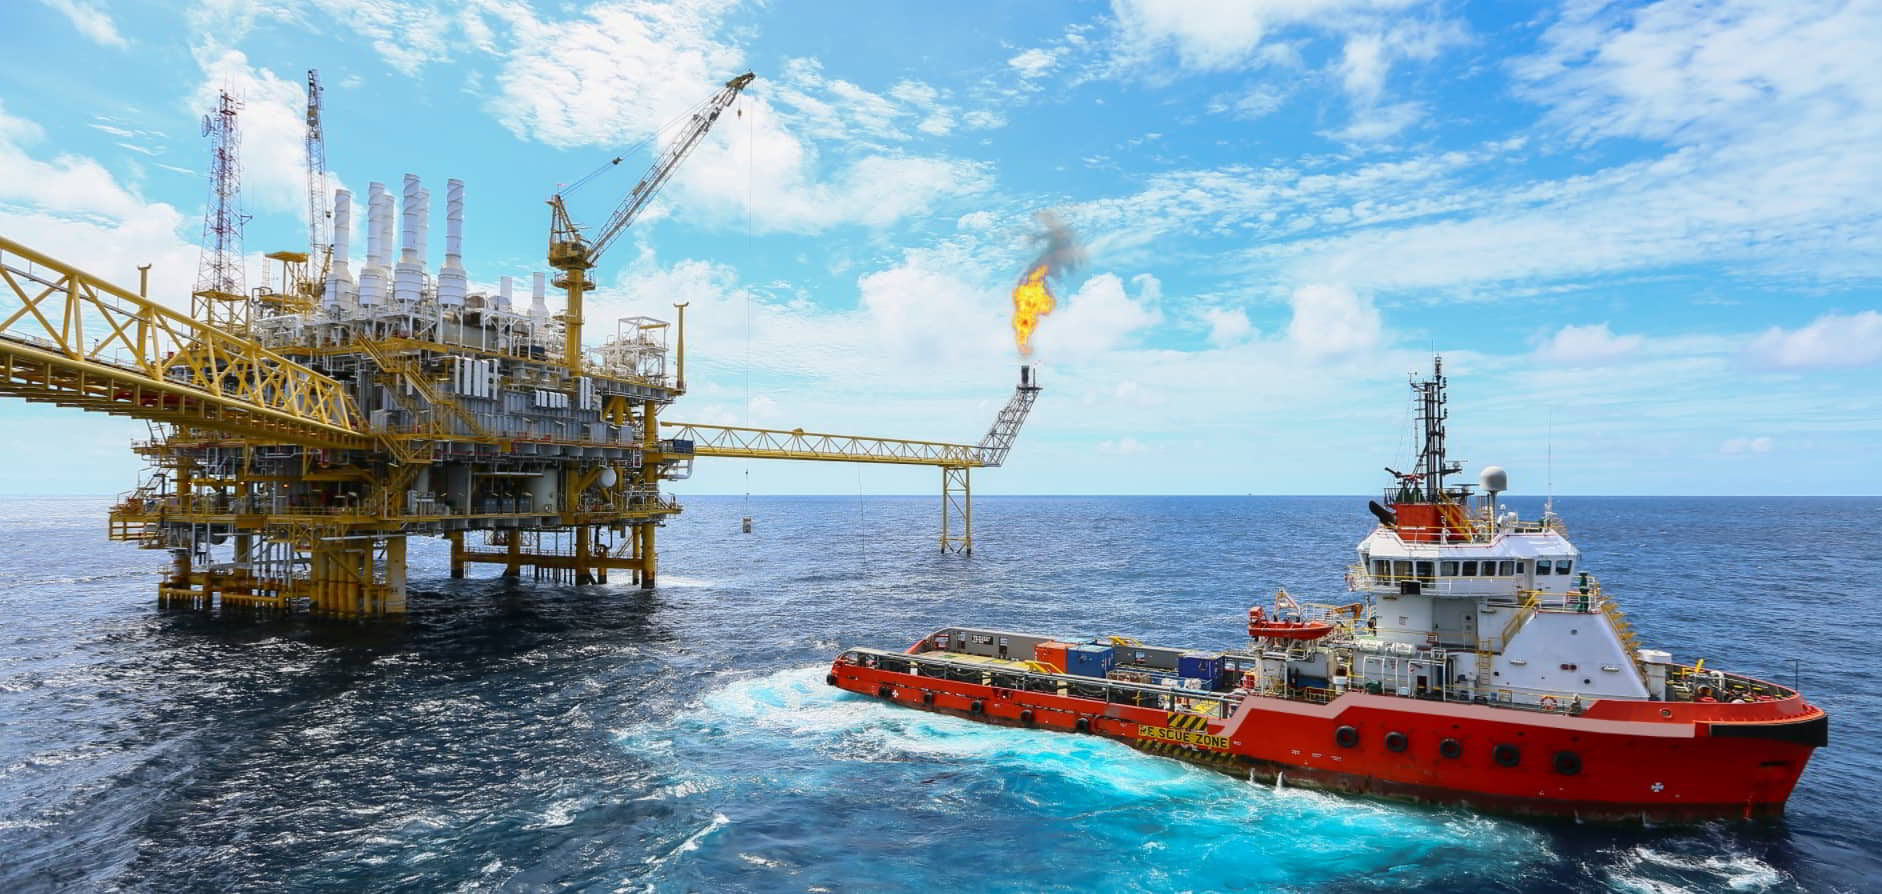 What will the new year bring to the oil & gas industry?